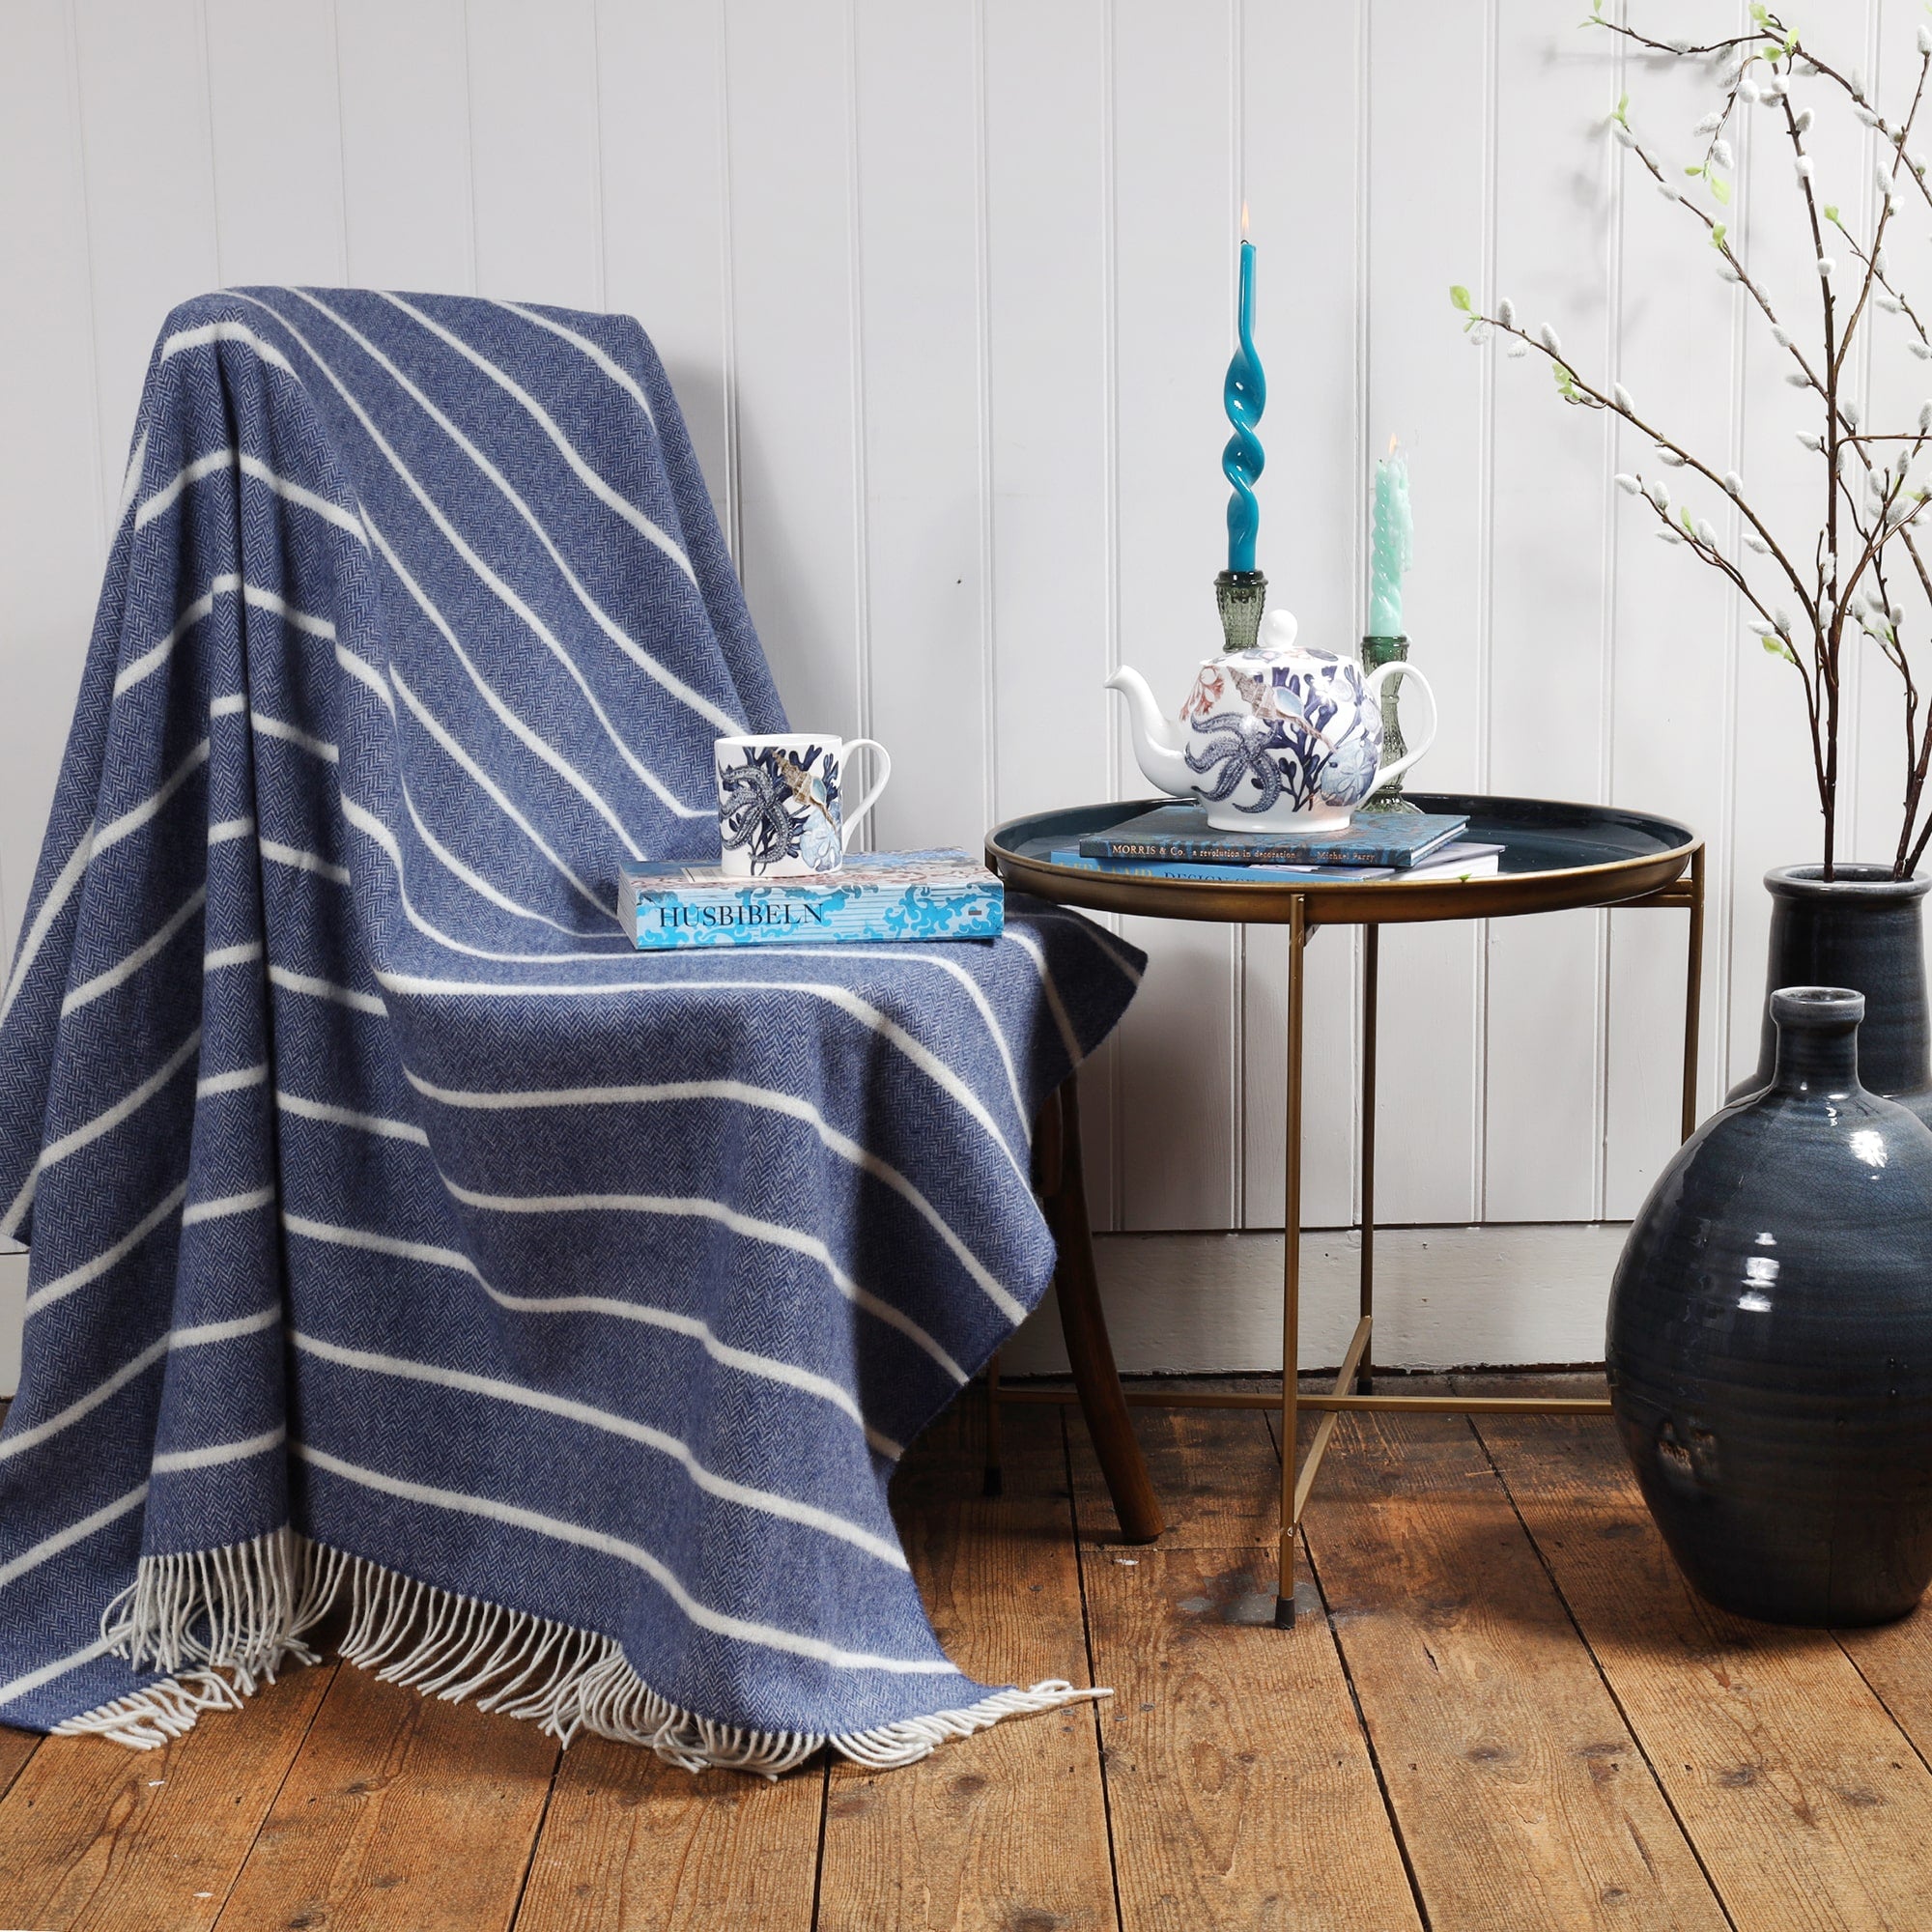 Lambswool Denim and White striped throw draped over a chair.Placed on the chair is a book and a mug in Beachcomber design,next to the chair is a table with books and a beachcomber Teapot and candles and candle holders.Next to the table are large navy vases with catkins coming out of them